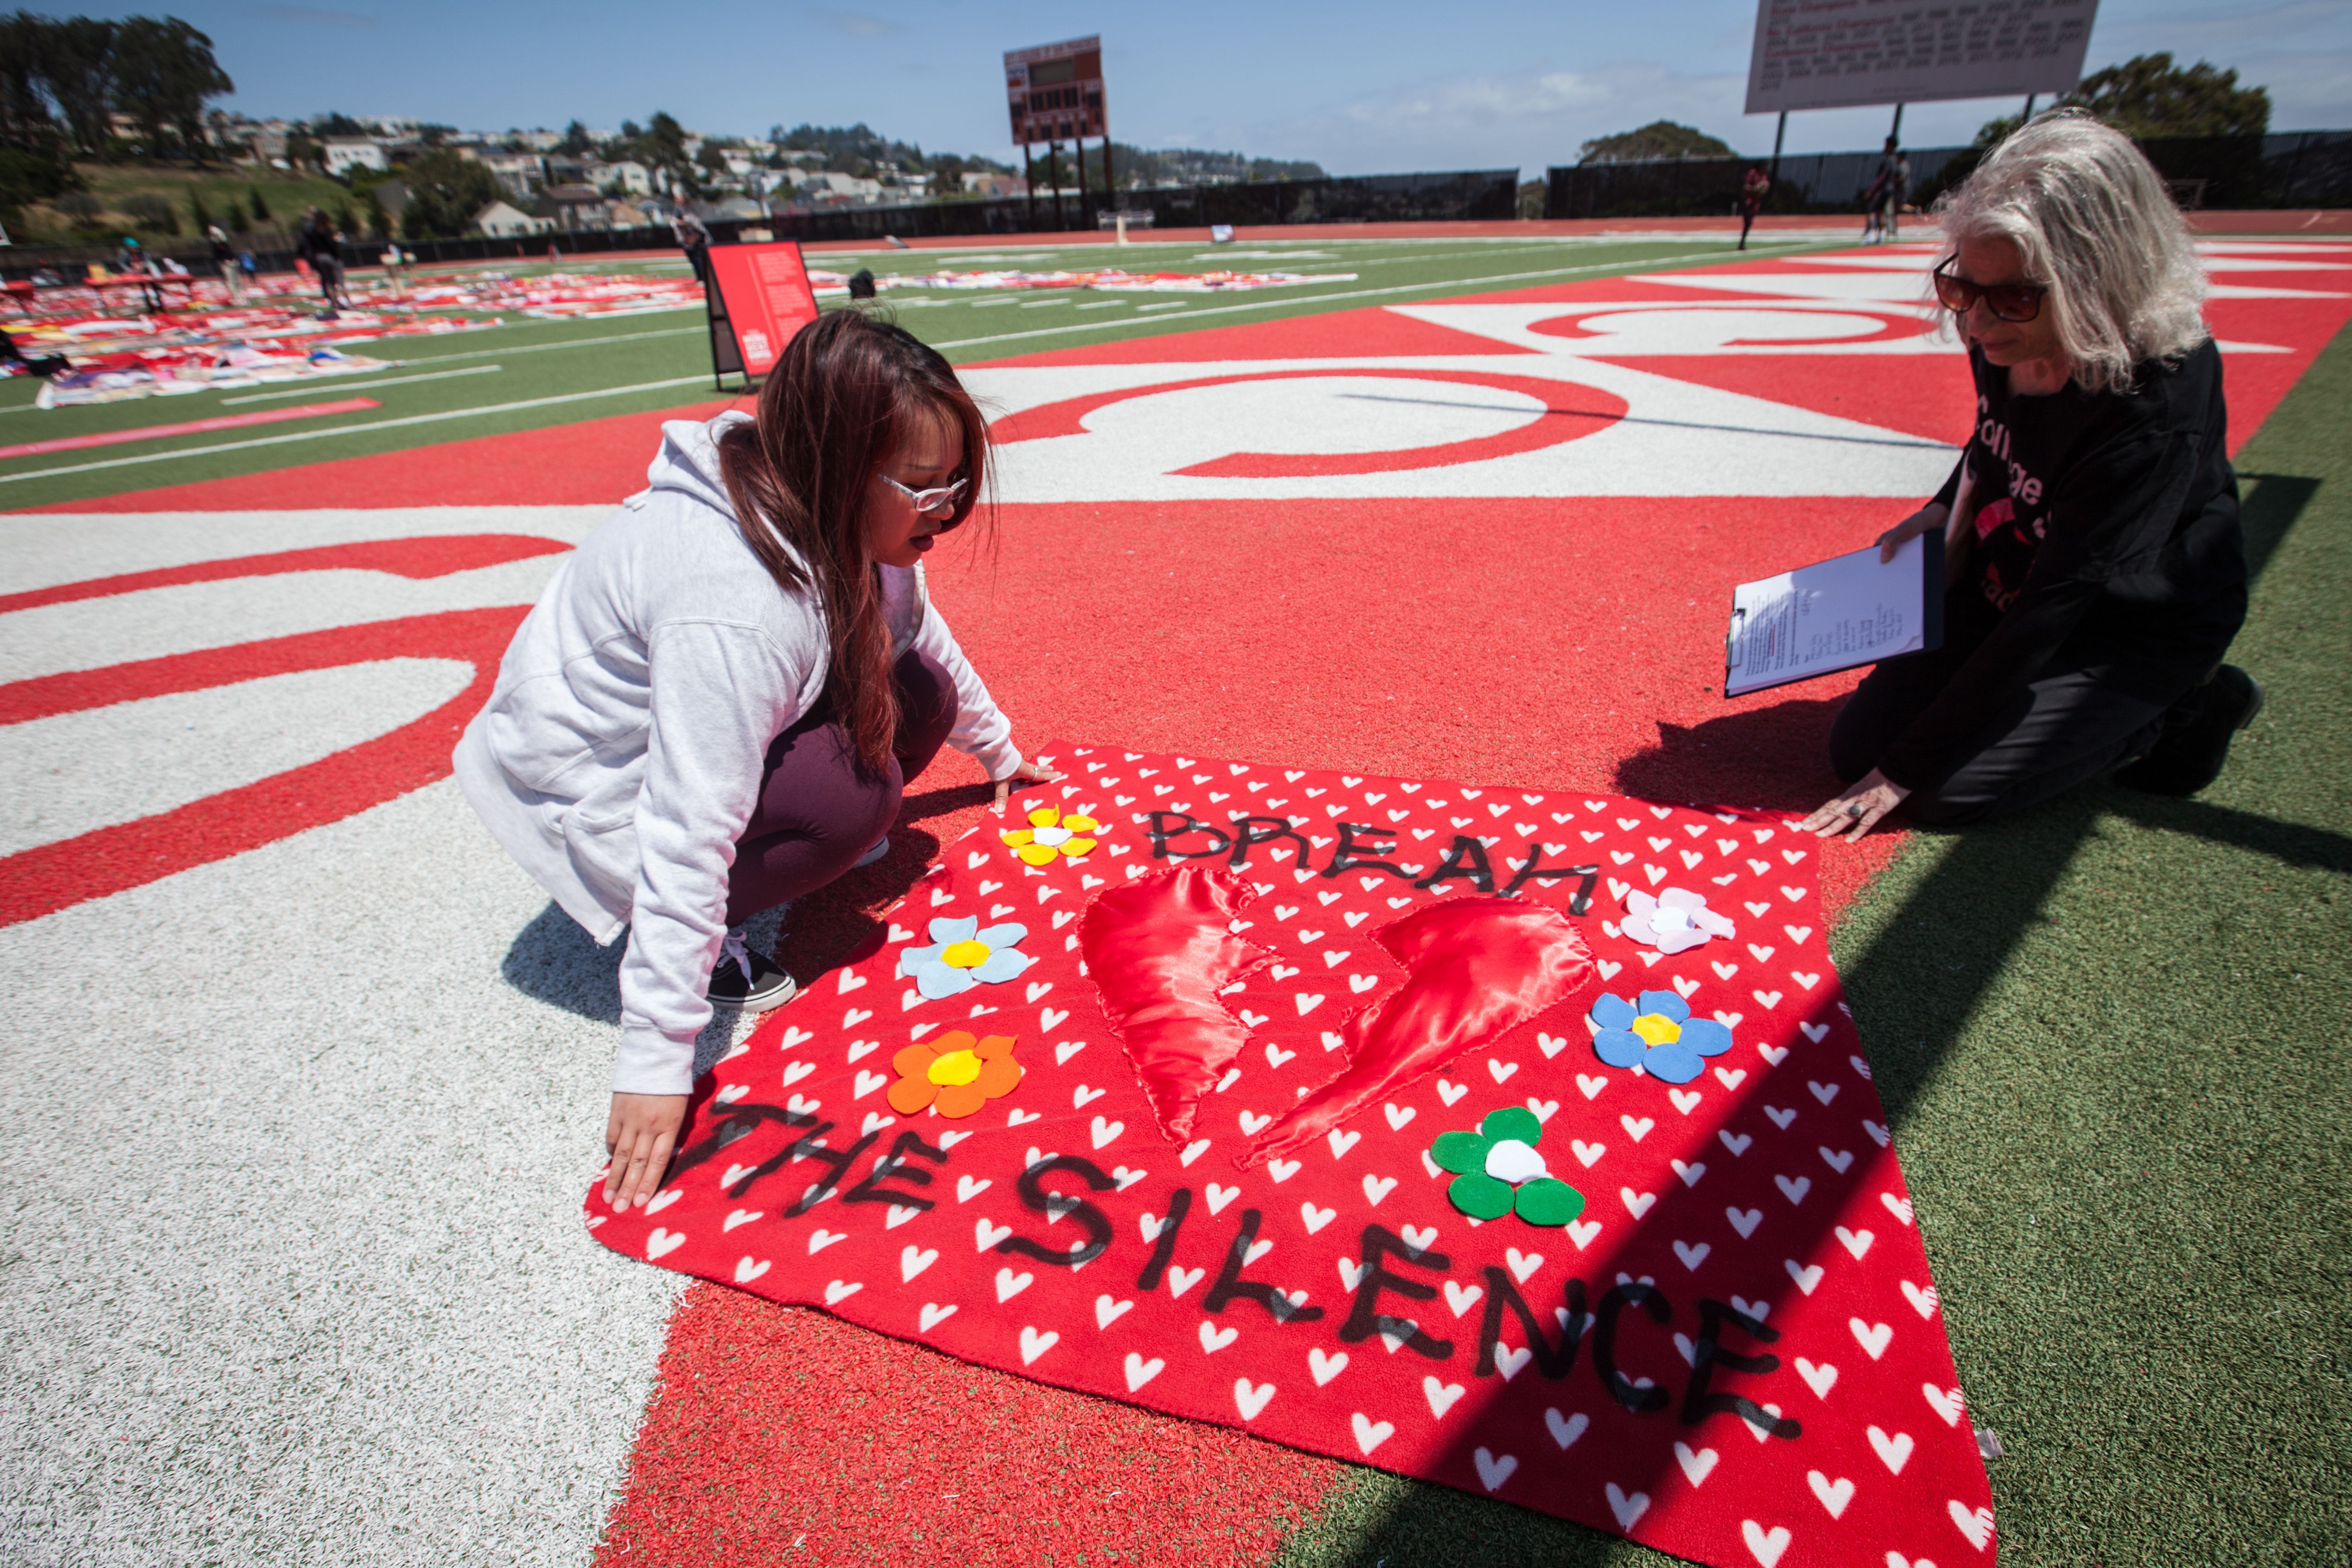 (L-R) An instructor of Ending Sexual Violence: Peer Education Shella Cervantes and Interim Project SURVIVE Coordinator Leslie Simon display a red square quilt made by a CCSF student Valentina Vargas during an installation of The Monument Quilt on the football field of George M. Rush Stadium at City College of San Francisco Ocean Campus on Saturday, May 6, 2017. Vargas made the quilt out of her old blanket that she had since she was 16 years old and figured that the blanket had seen all her past unhealthy relationship; so making it into a quilt is the way for her to recycle old energy through healing and art. (Photo by Ekevara Kitpowsong) 